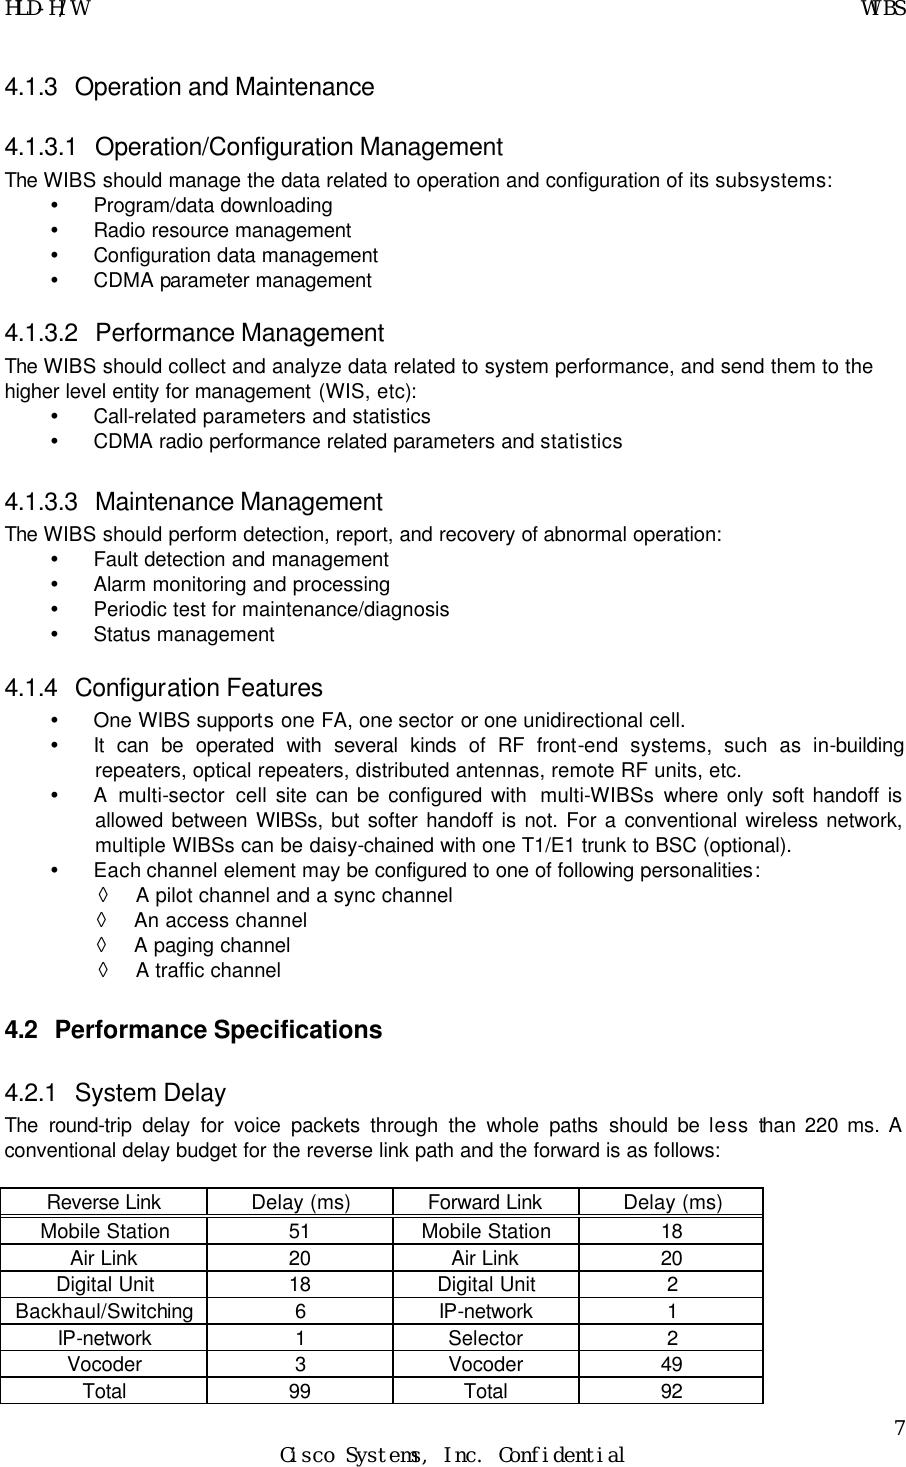 HLD-H/W    WIBS 7 Cisco Systems, Inc. Confidential  4.1.3 Operation and Maintenance 4.1.3.1 Operation/Configuration Management The WIBS should manage the data related to operation and configuration of its subsystems: Ÿ Program/data downloading Ÿ Radio resource management Ÿ Configuration data management Ÿ CDMA parameter management 4.1.3.2 Performance Management The WIBS should collect and analyze data related to system performance, and send them to the  higher level entity for management (WIS, etc): Ÿ Call-related parameters and statistics Ÿ CDMA radio performance related parameters and statistics 4.1.3.3 Maintenance Management The WIBS should perform detection, report, and recovery of abnormal operation:  Ÿ Fault detection and management Ÿ Alarm monitoring and processing Ÿ Periodic test for maintenance/diagnosis Ÿ Status management 4.1.4 Configuration Features Ÿ One WIBS supports one FA, one sector or one unidirectional cell. Ÿ It can be operated with several kinds of RF front-end systems, such as in-building repeaters, optical repeaters, distributed antennas, remote RF units, etc. Ÿ A multi-sector cell site can be configured with  multi-WIBSs where only soft handoff is allowed between WIBSs, but softer handoff is not. For a conventional wireless network, multiple WIBSs can be daisy-chained with one T1/E1 trunk to BSC (optional). Ÿ Each channel element may be configured to one of following personalities: ◊ A pilot channel and a sync channel ◊ An access channel ◊ A paging channel ◊ A traffic channel 4.2 Performance Specifications 4.2.1 System Delay The round-trip delay for voice packets through the whole paths should be less than 220 ms. A conventional delay budget for the reverse link path and the forward is as follows:  Reverse Link Delay (ms) Forward Link Delay (ms) Mobile Station 51 Mobile Station 18 Air Link 20 Air Link 20 Digital Unit 18 Digital Unit 2 Backhaul/Switching 6 IP-network 1 IP-network 1 Selector 2 Vocoder 3 Vocoder 49 Total 99 Total 92 